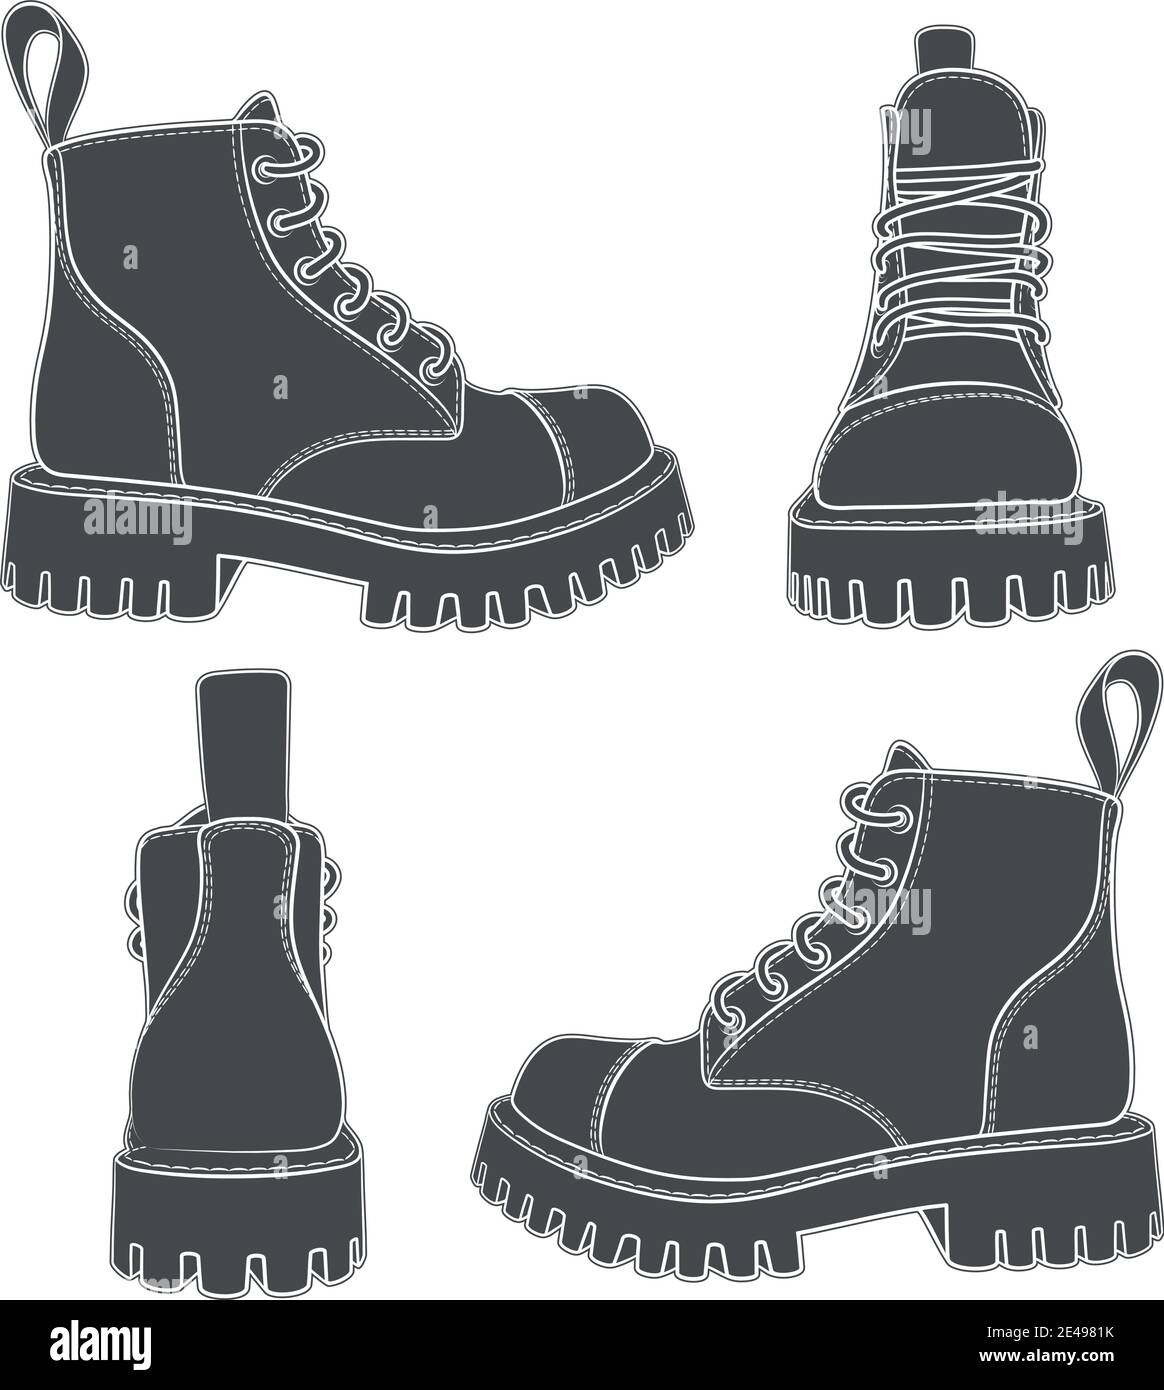 Vector set of drawings with boots. Isolated objects on a white background. Stock Vector